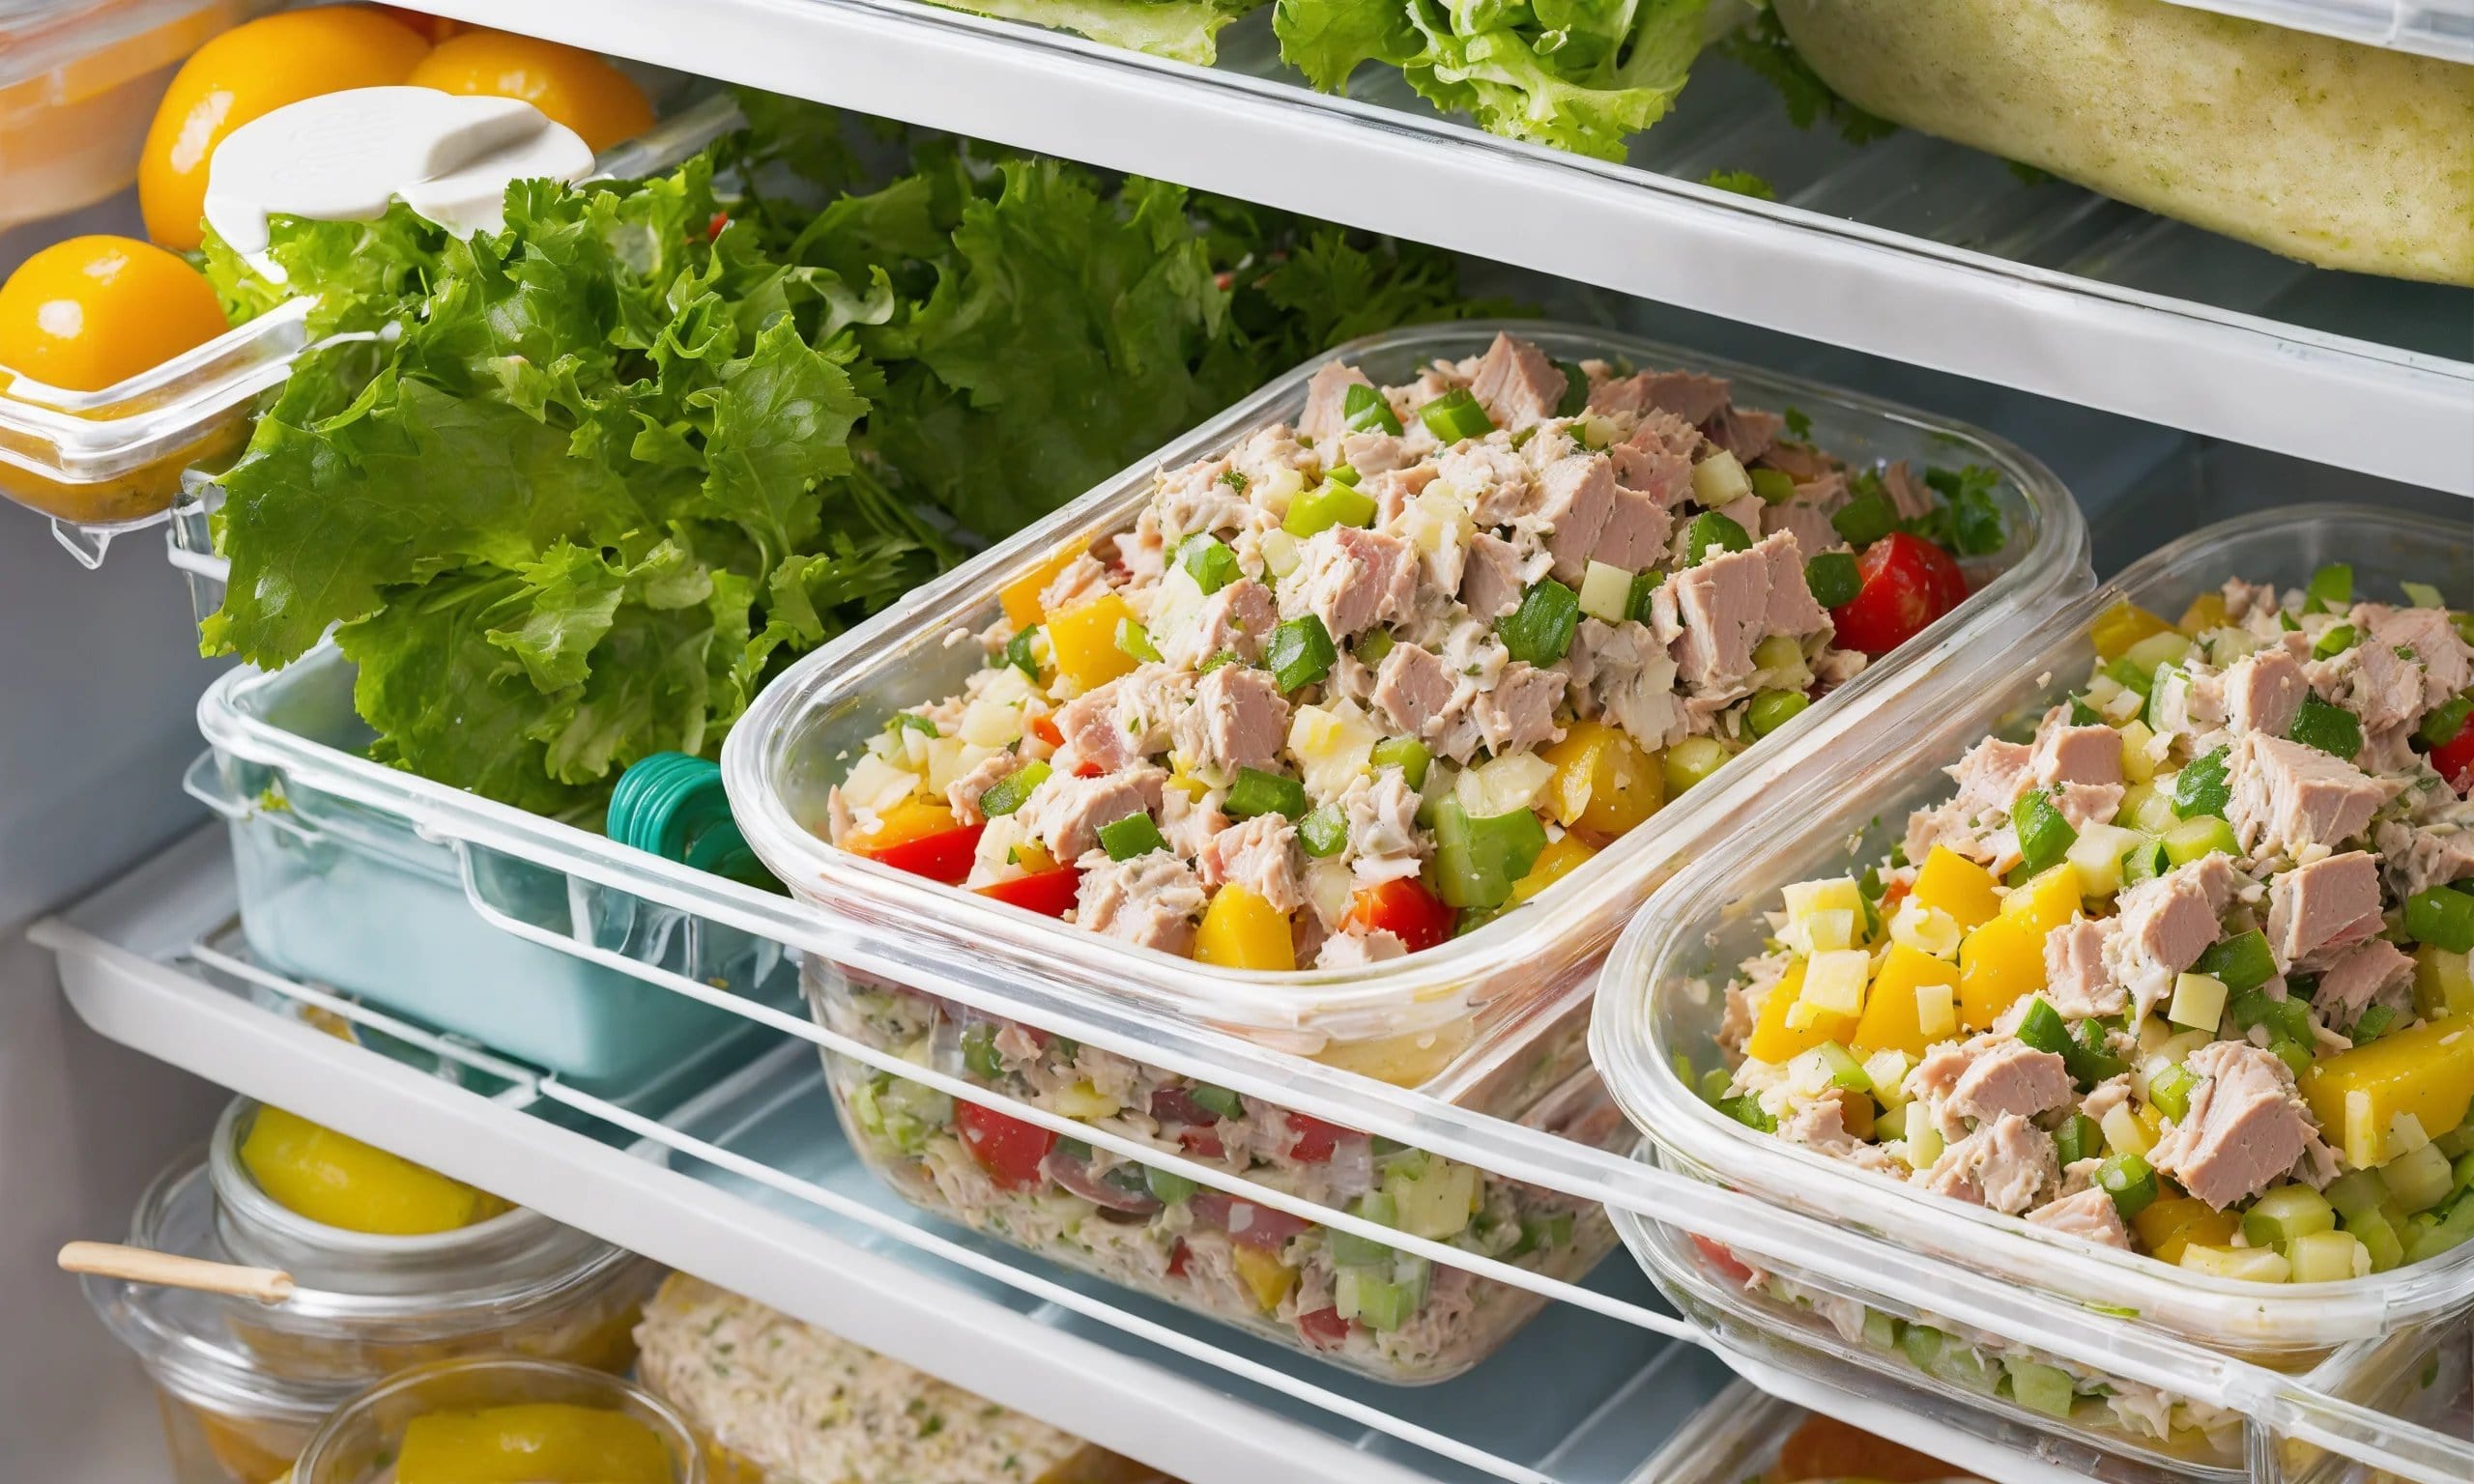 An open refrigerator with a shelf dedicated to storing tuna salad in various airtight containers. A thermometer inside the fridge shows a temperature below 40°F.